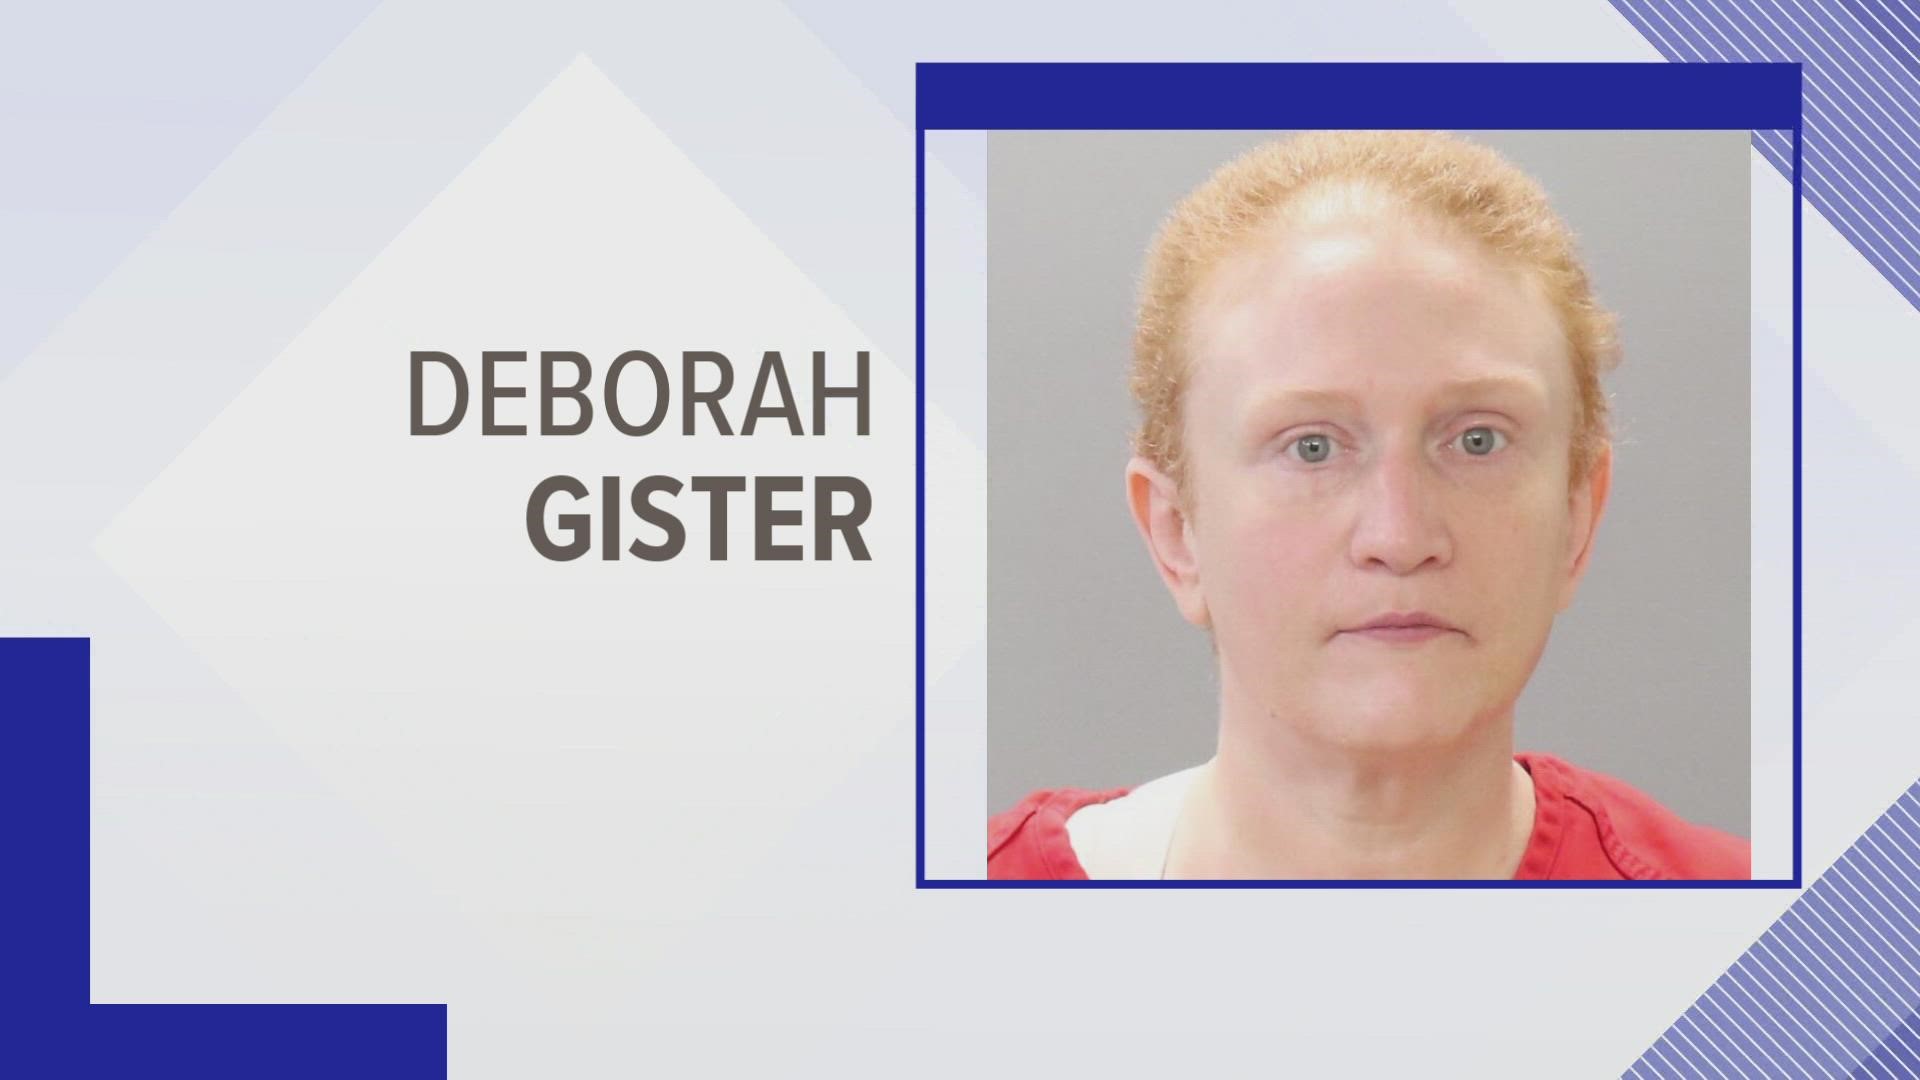 A woman charged with the death of a mummified man will appear in court. Police said they found the man dead under a tarp in north Knoxville in 2019.